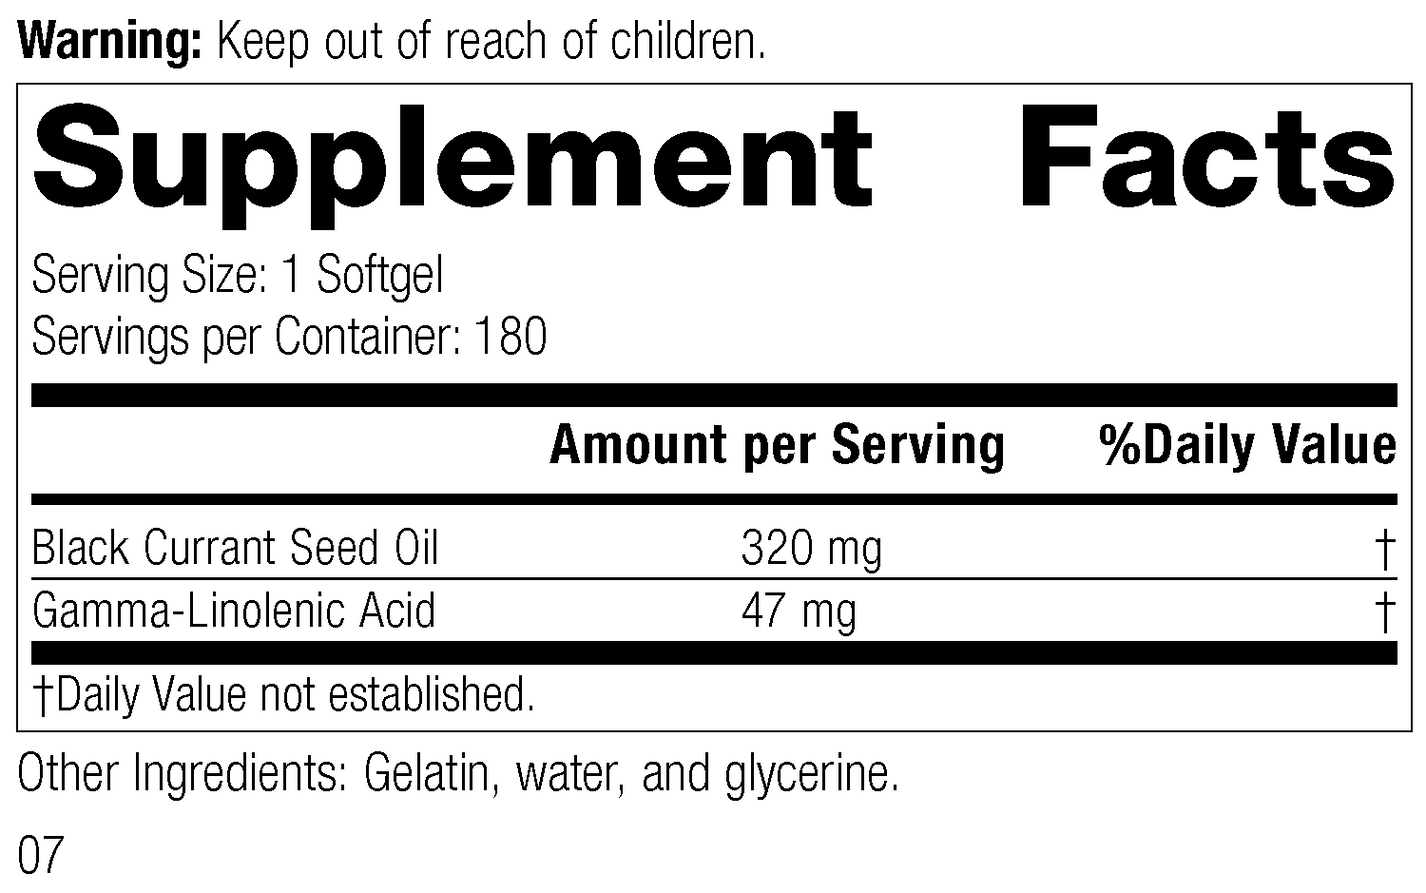 Black Currant Seed Oil, 180 Softgels, Rev 07, Supplement Facts